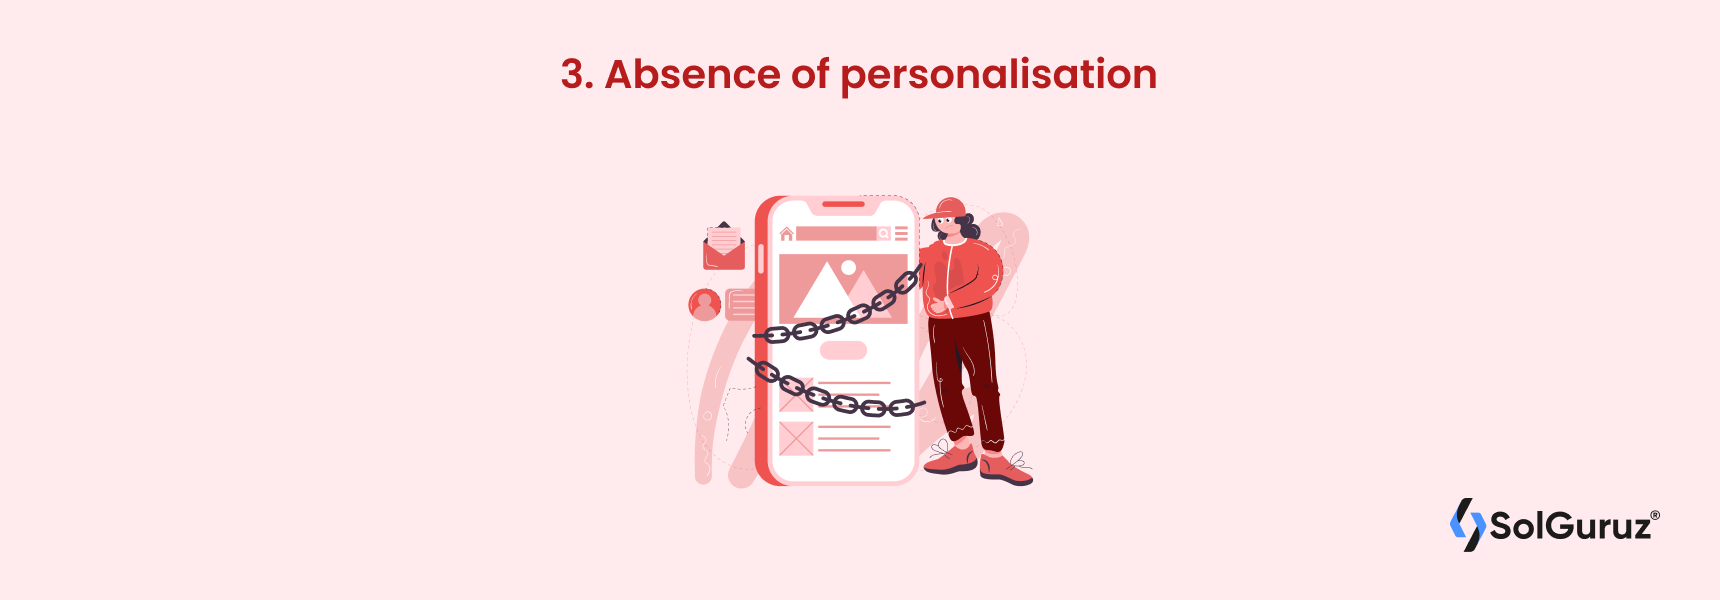 Absence of personalisation